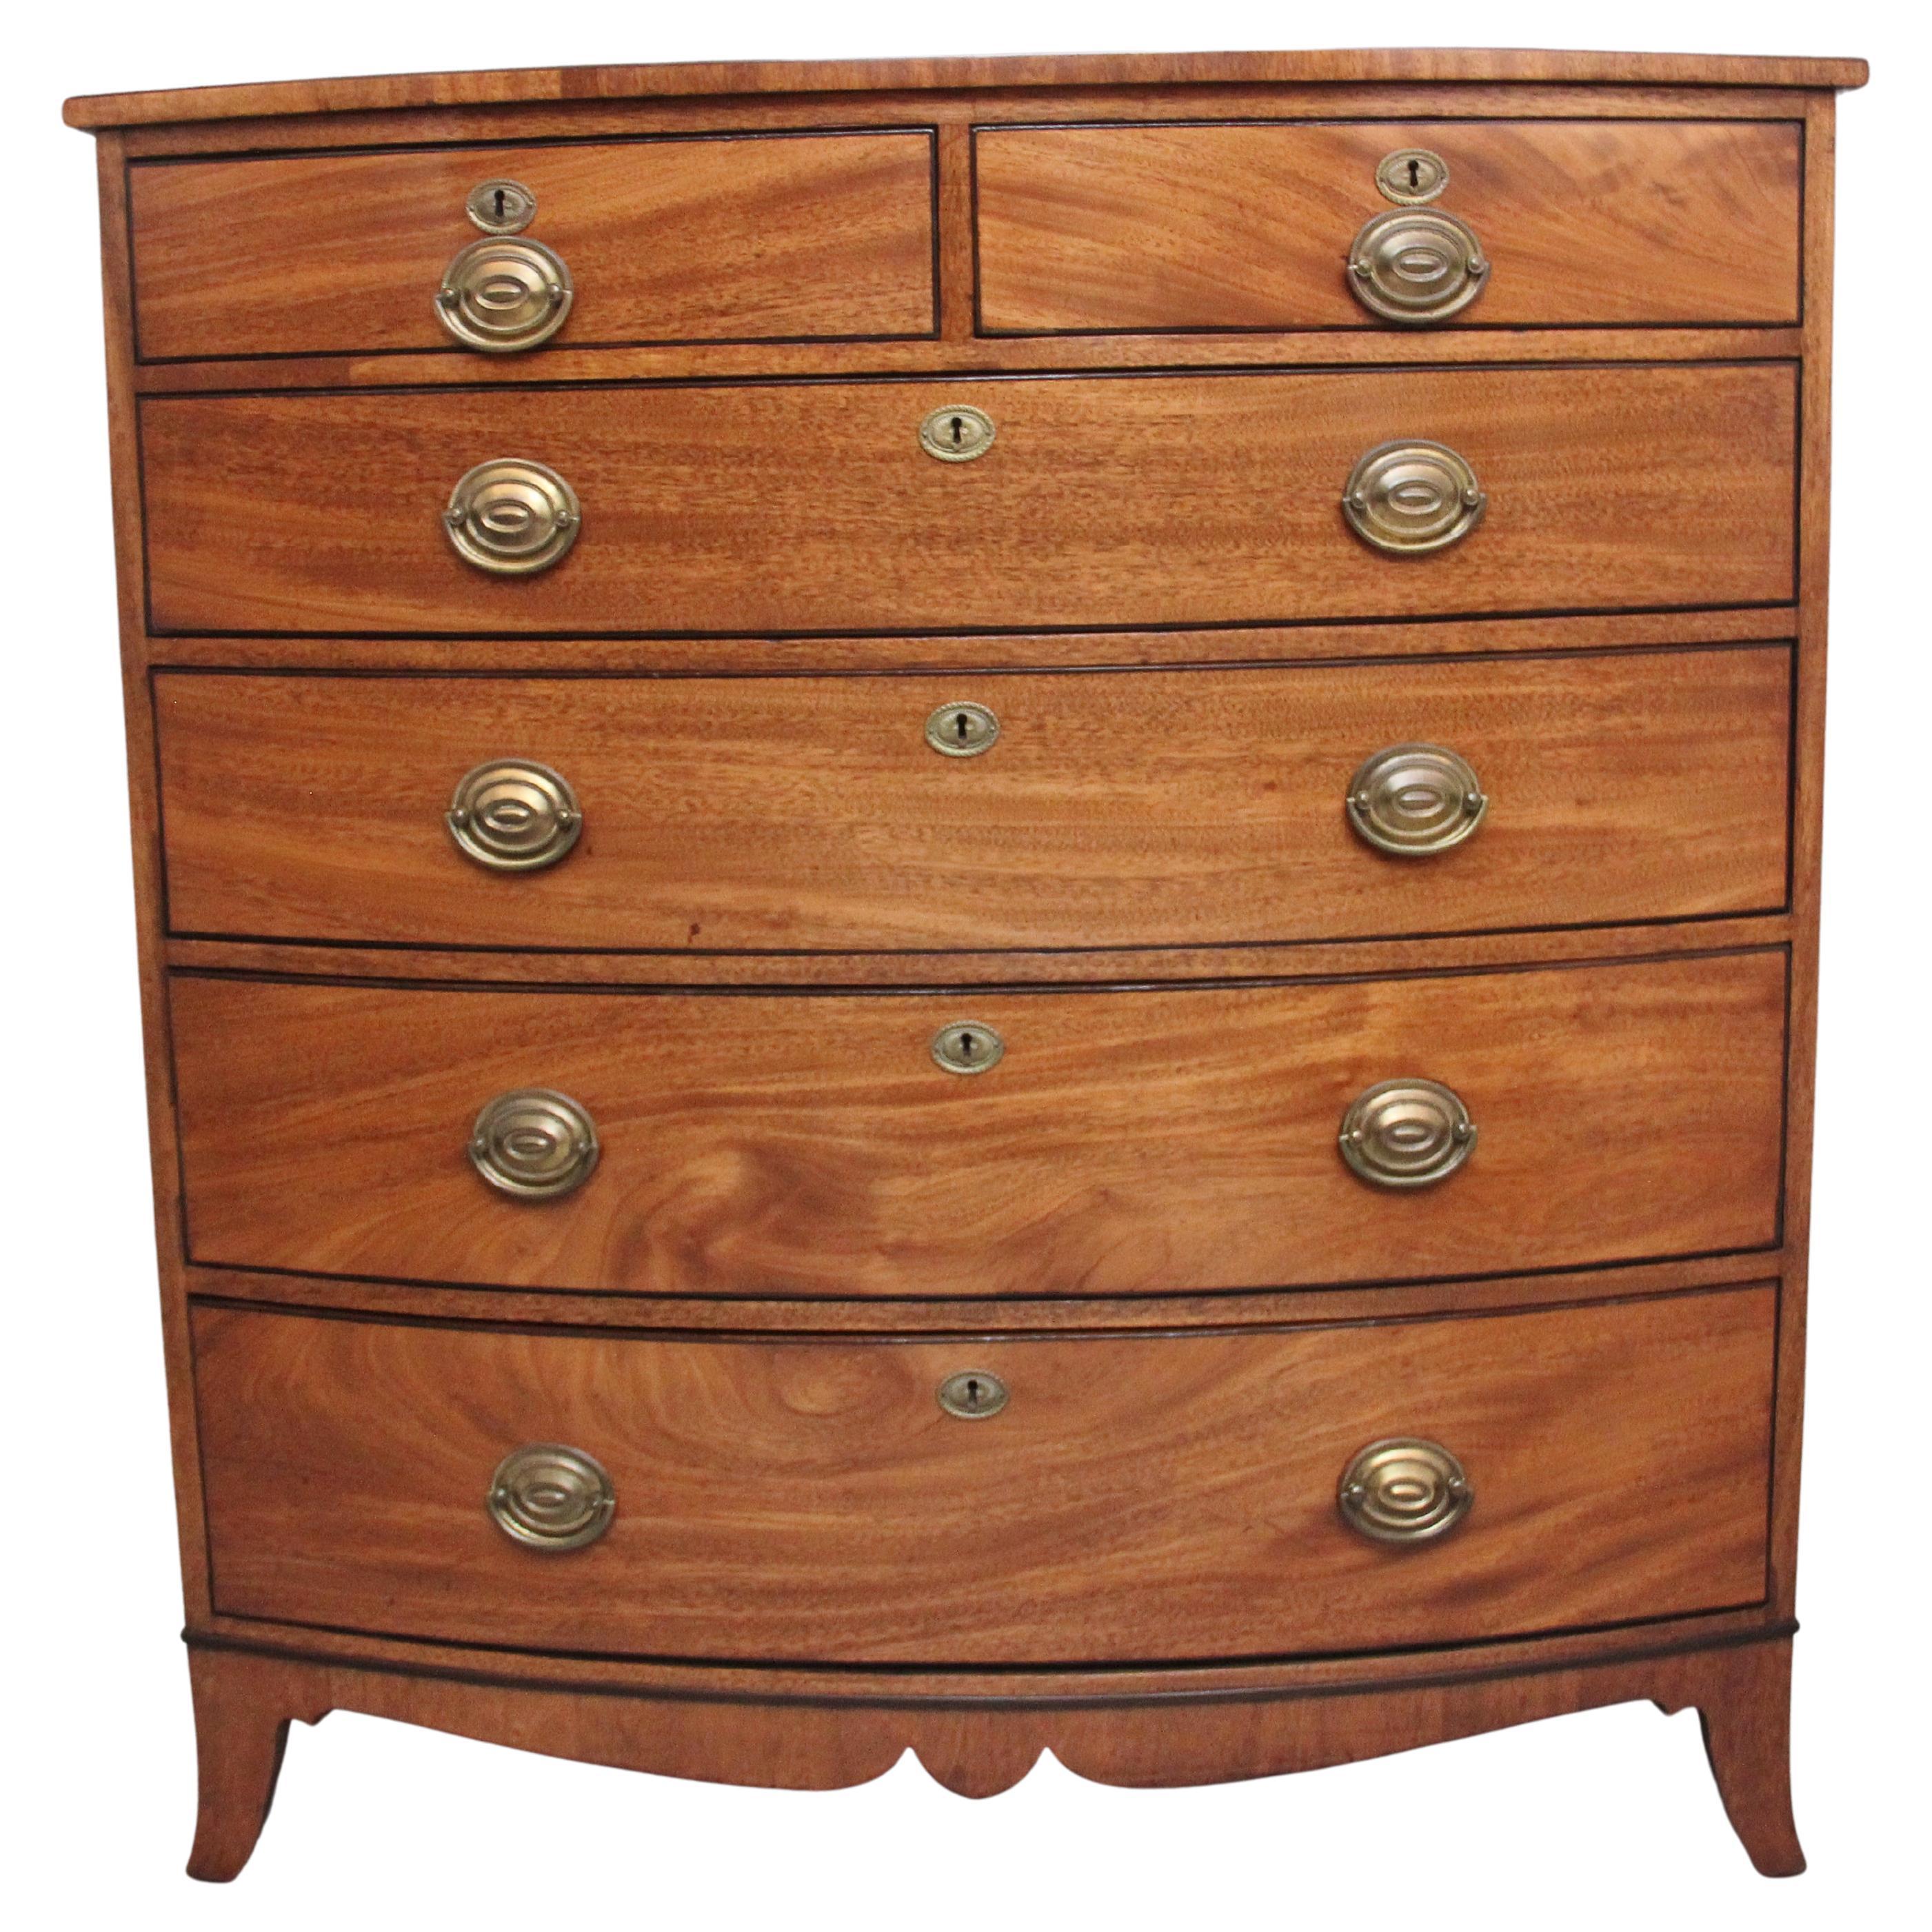 Superb Quality Early 19th Century Tall Mahogany Bowfront Chest of Drawers For Sale